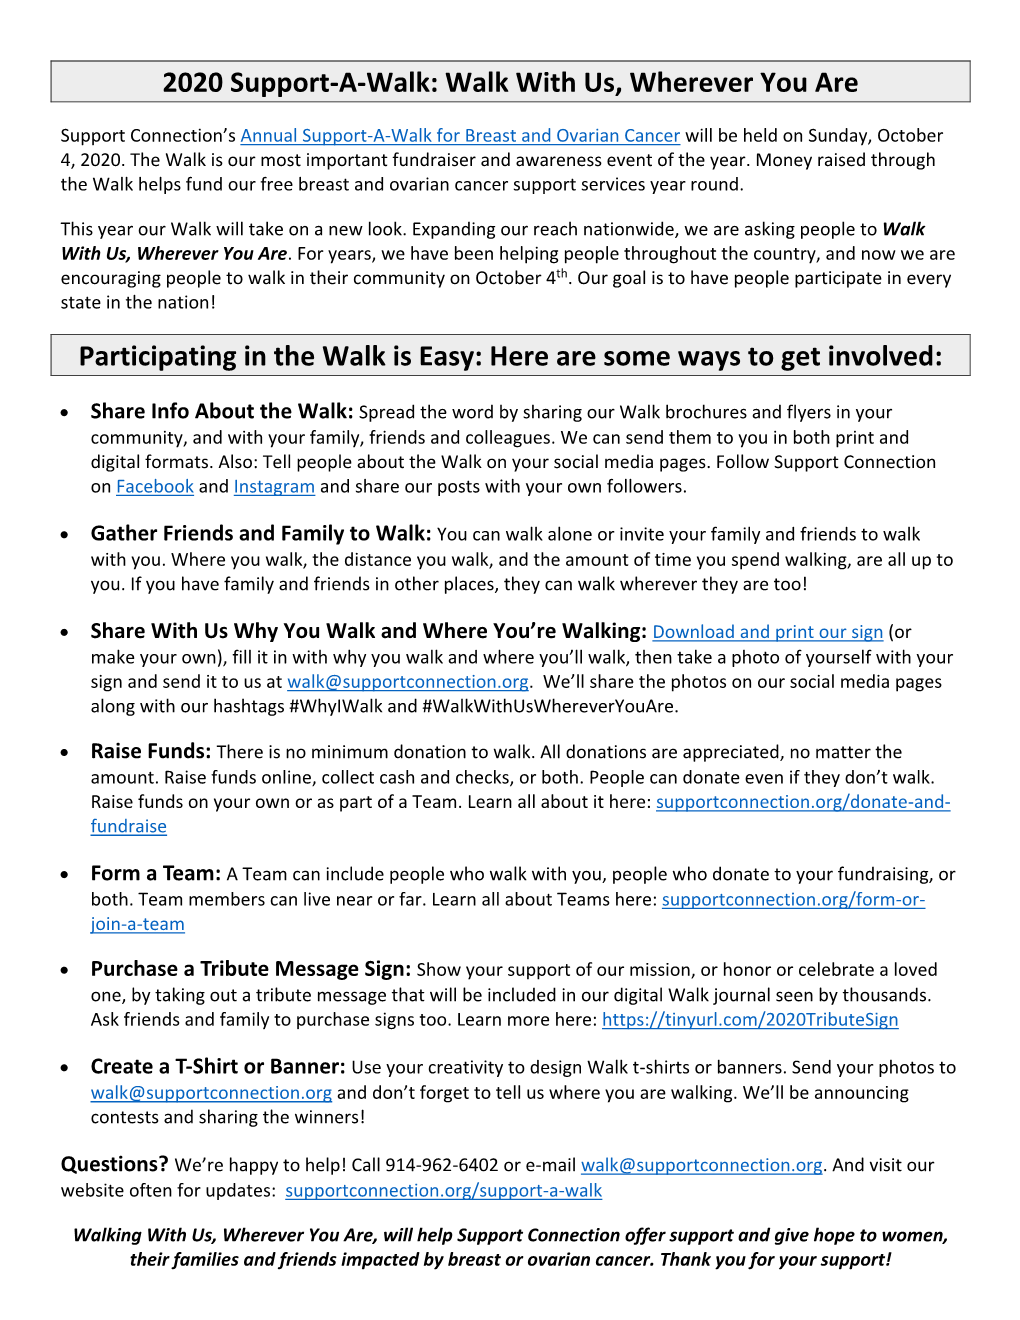 Walk with Us, Wherever You Are Participating in the Walk Is Easy